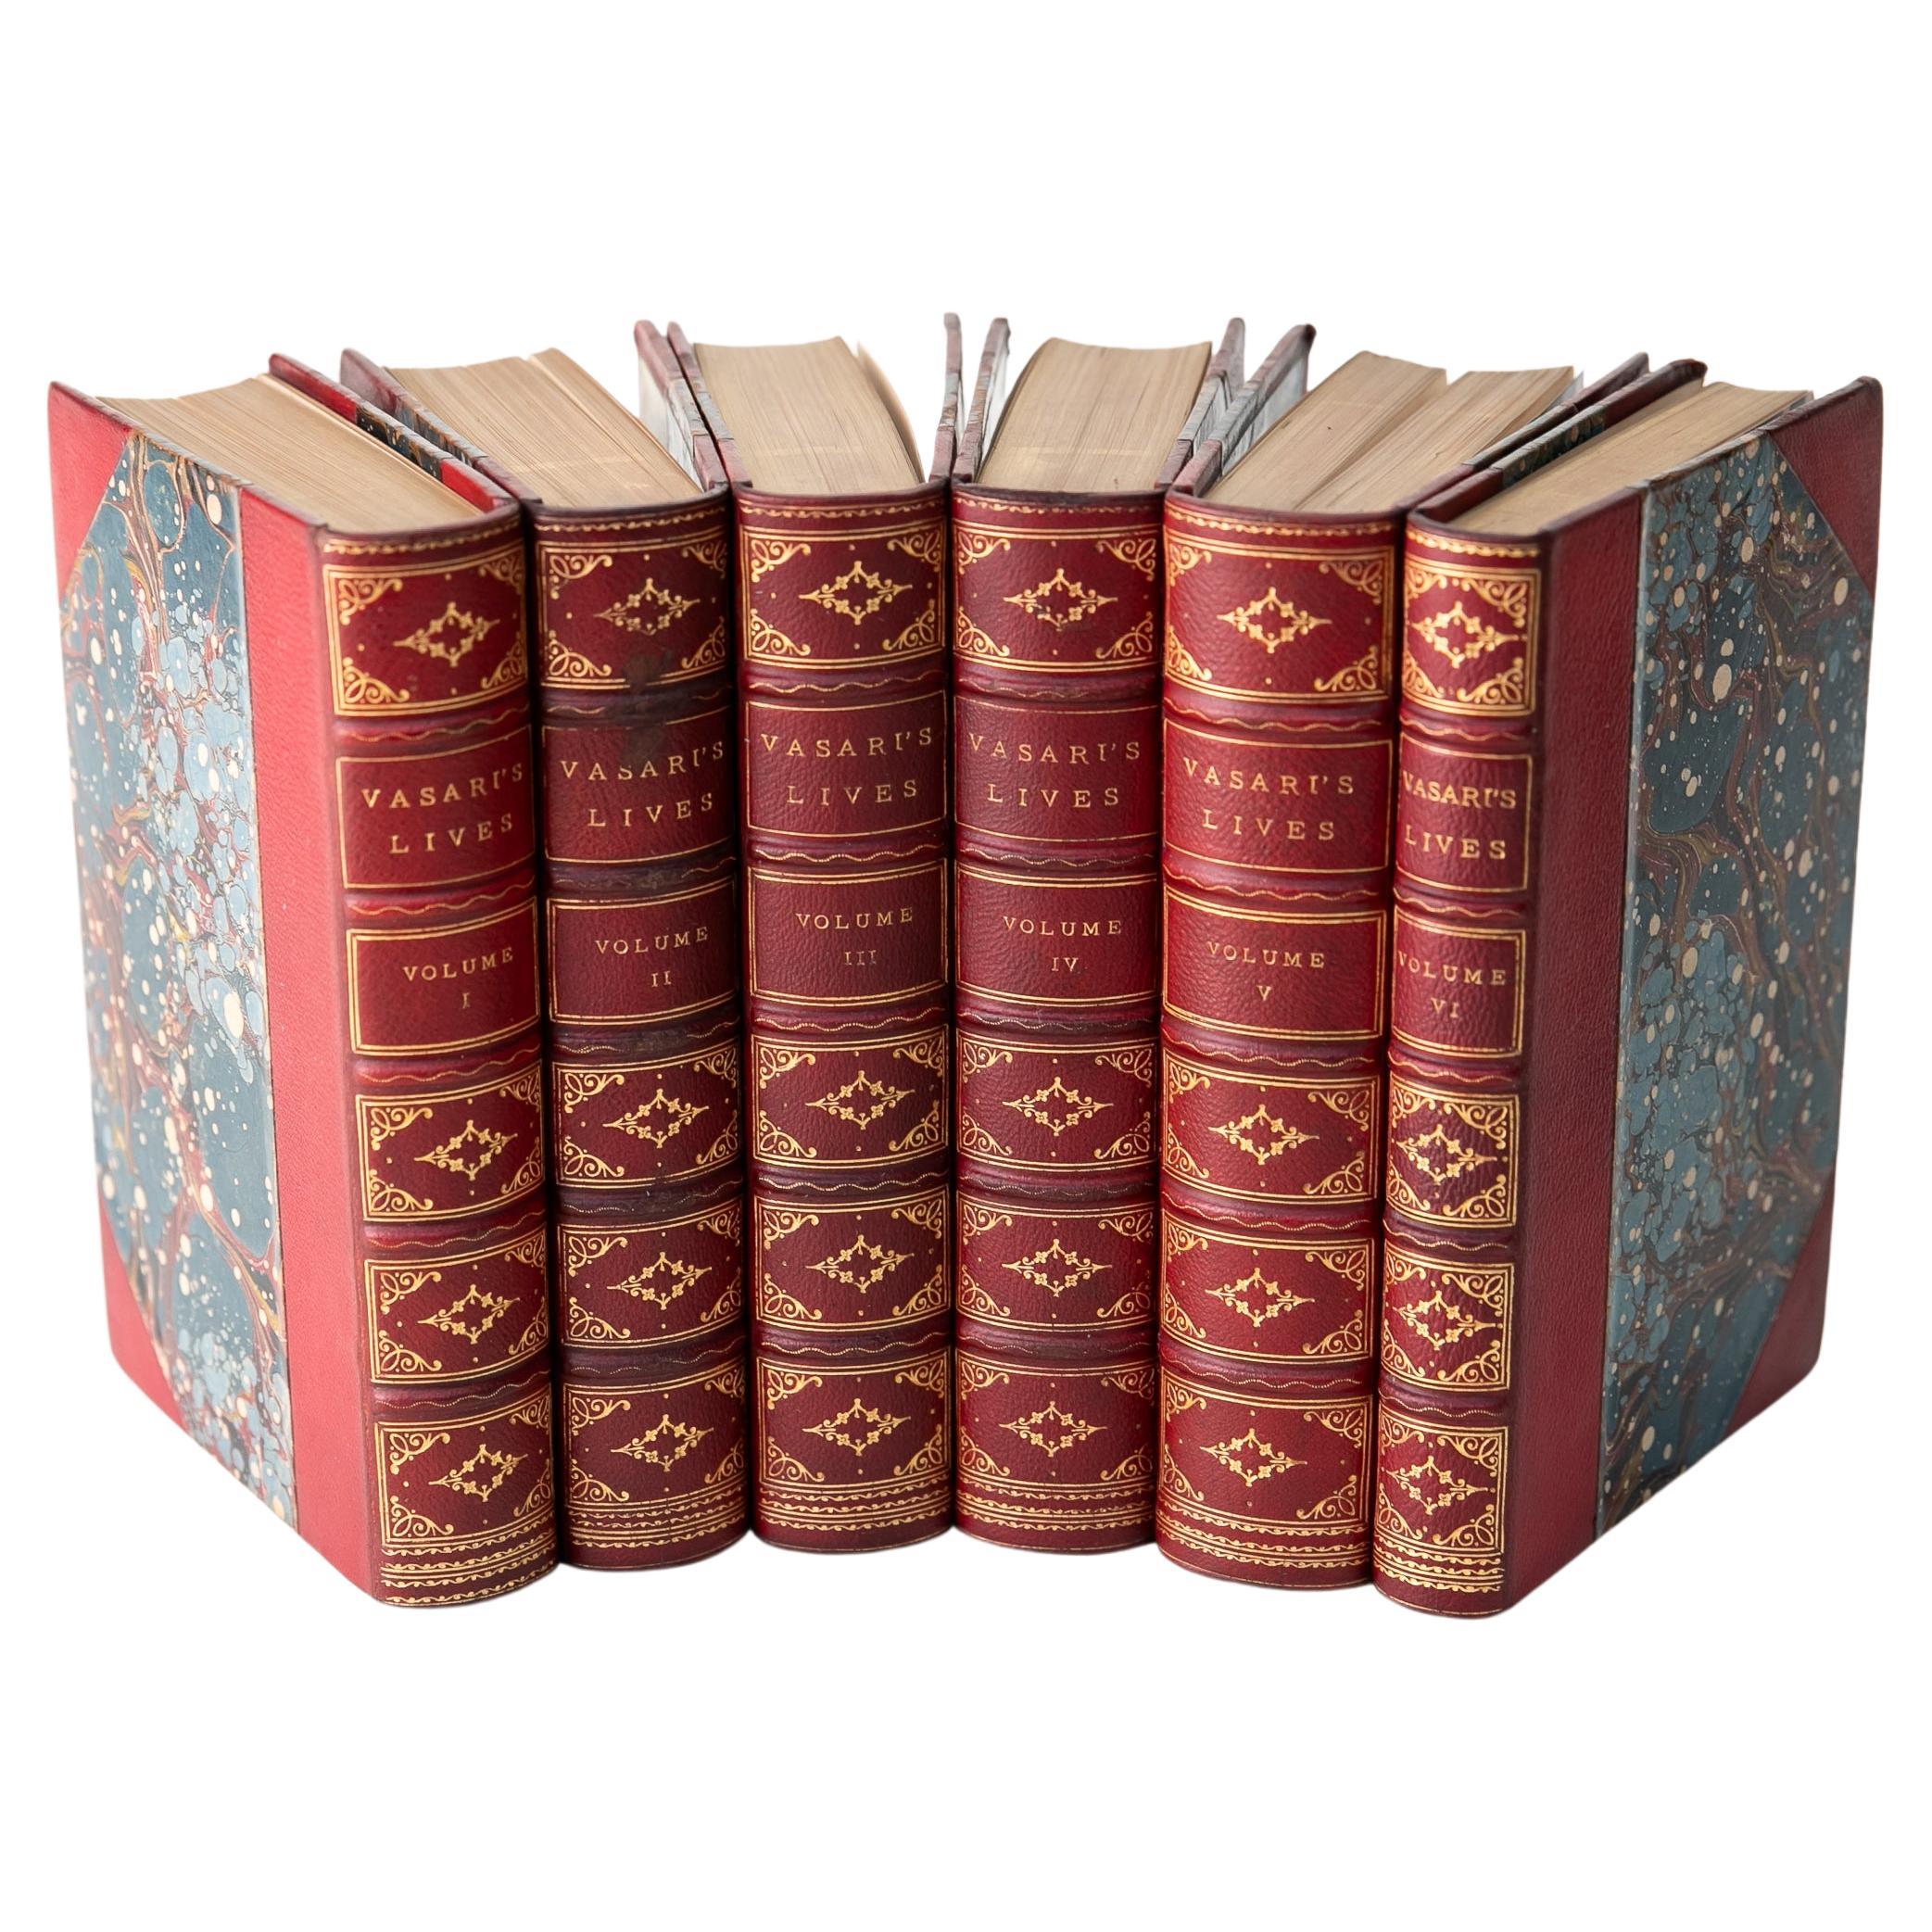 6 Volumes. G. Vasari, Lives of the Eminent Painters, Sculptors, and Architects For Sale